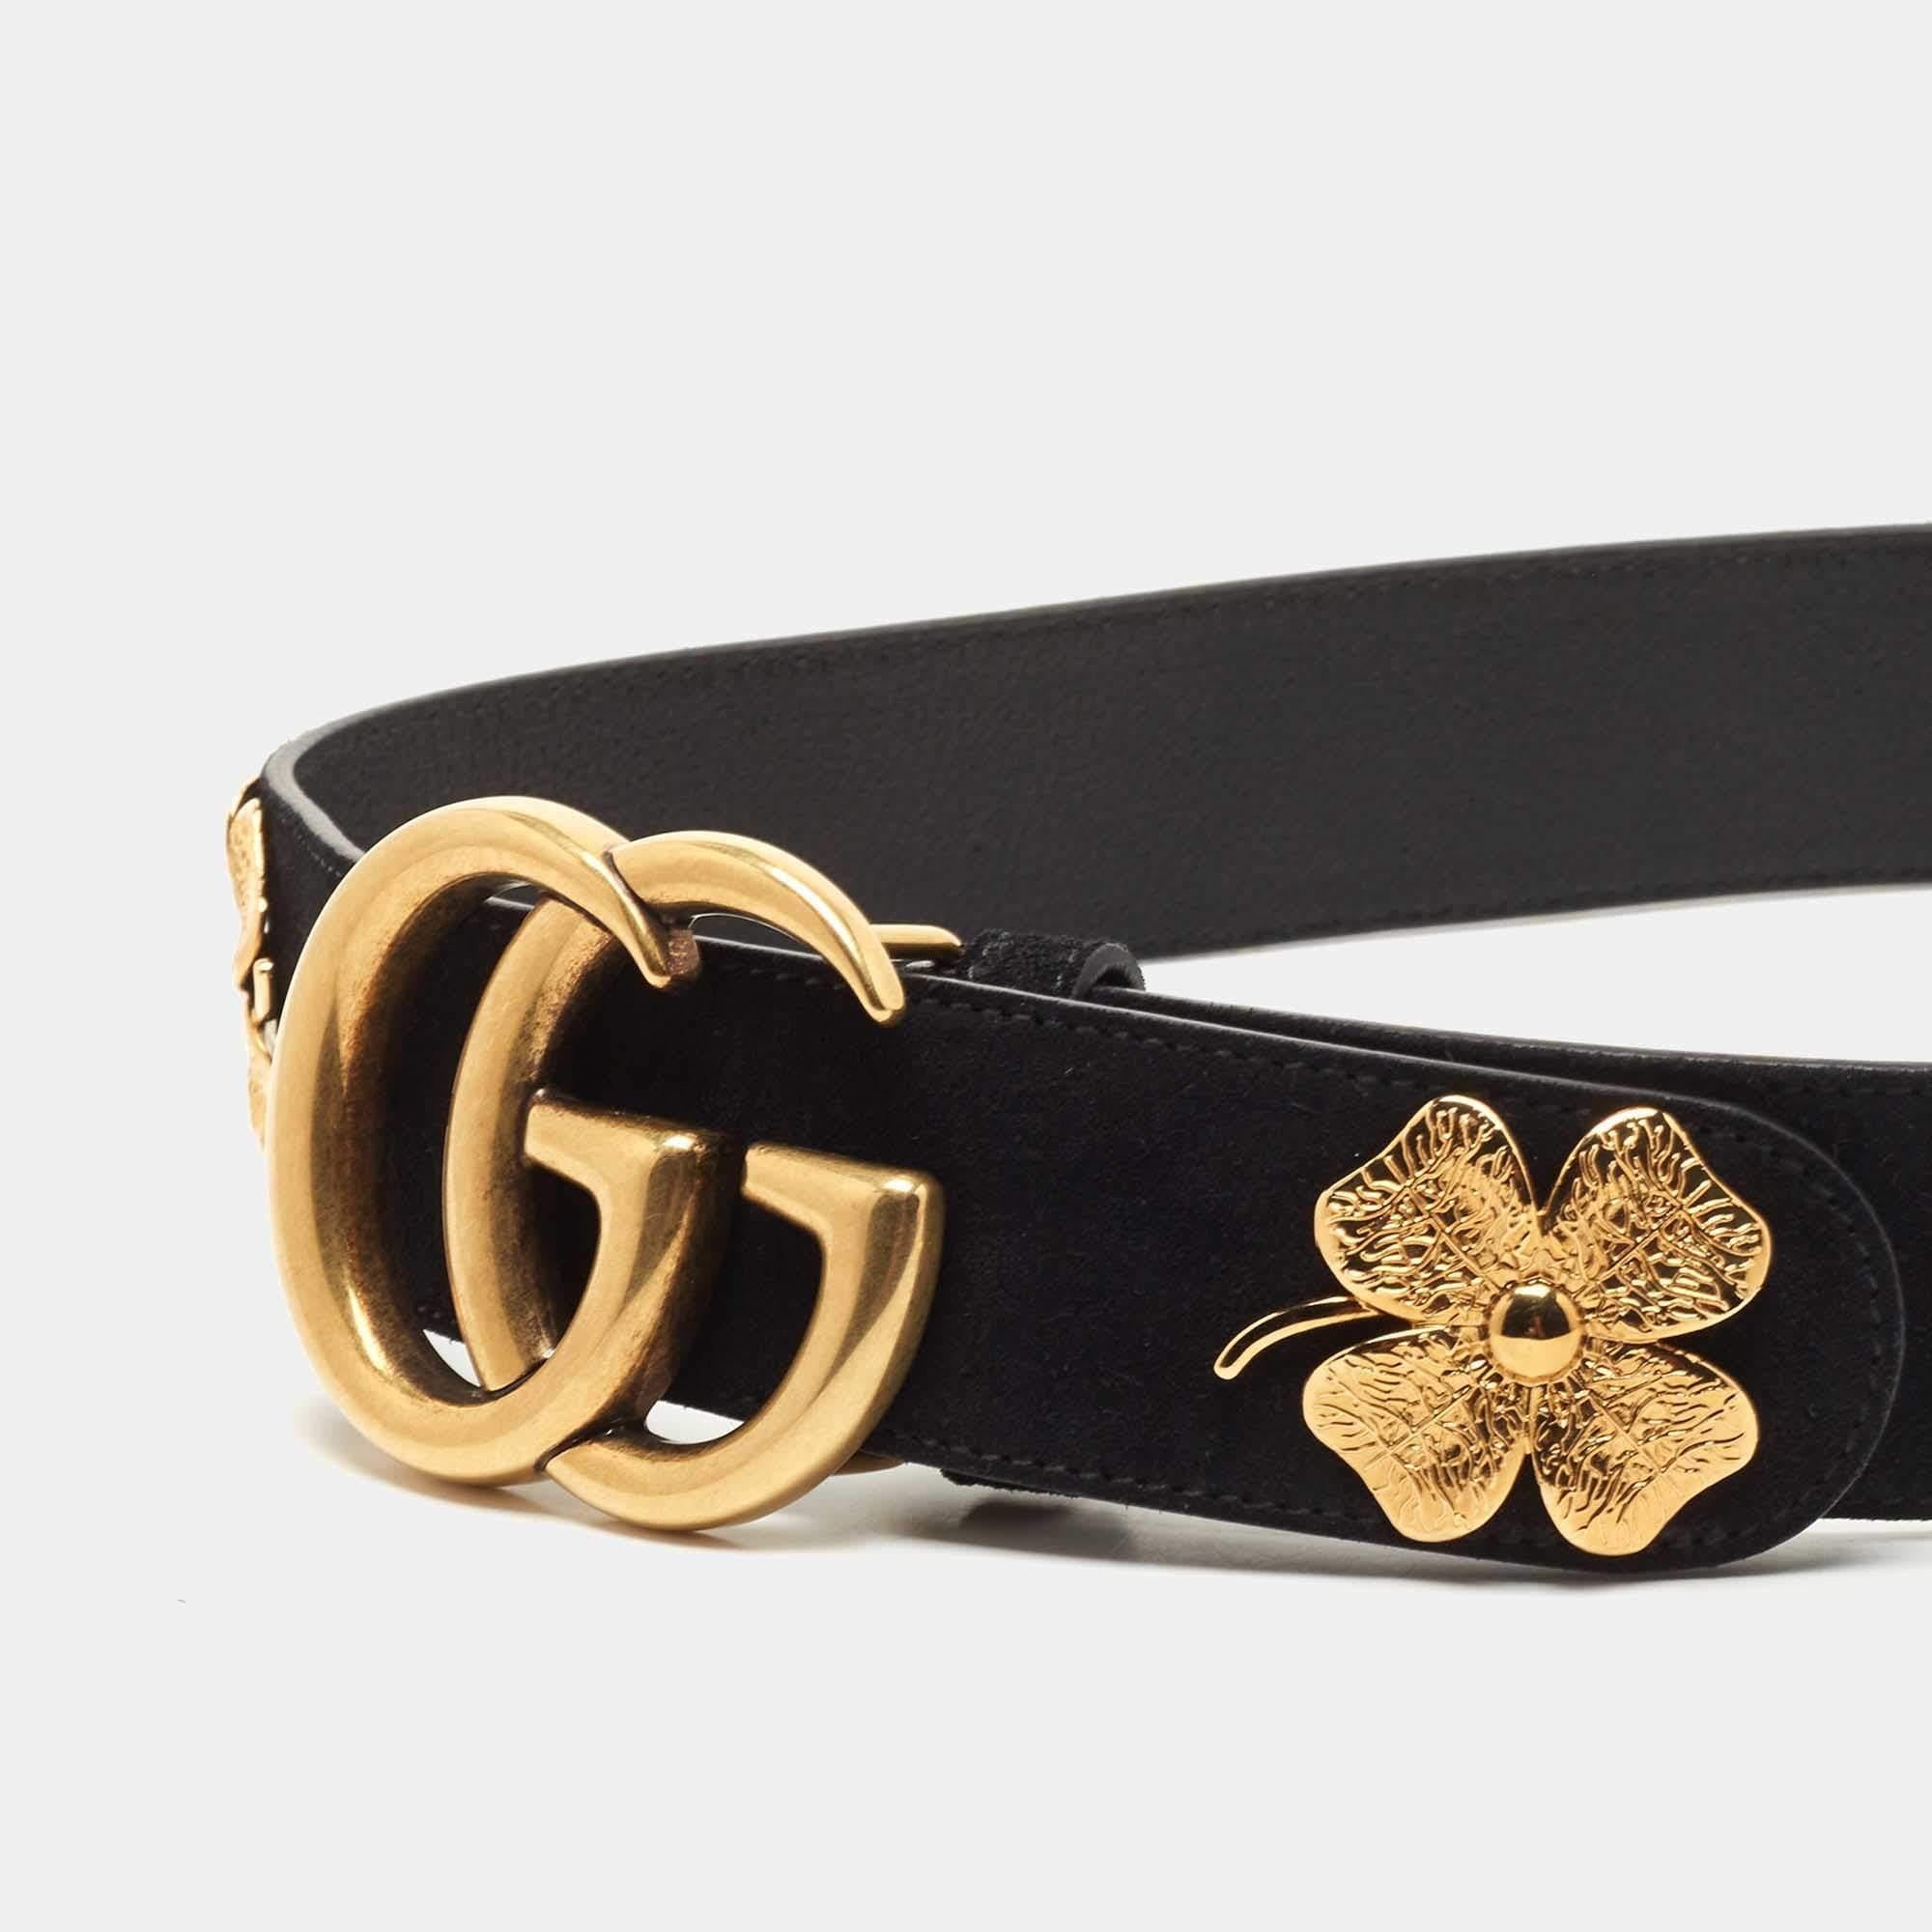 Grant your style with signature beauty and elegance as you accessorize with this gorgeous belt from Gucci. It is made from leather in black and features the GG buckle and clover leaf accents.

